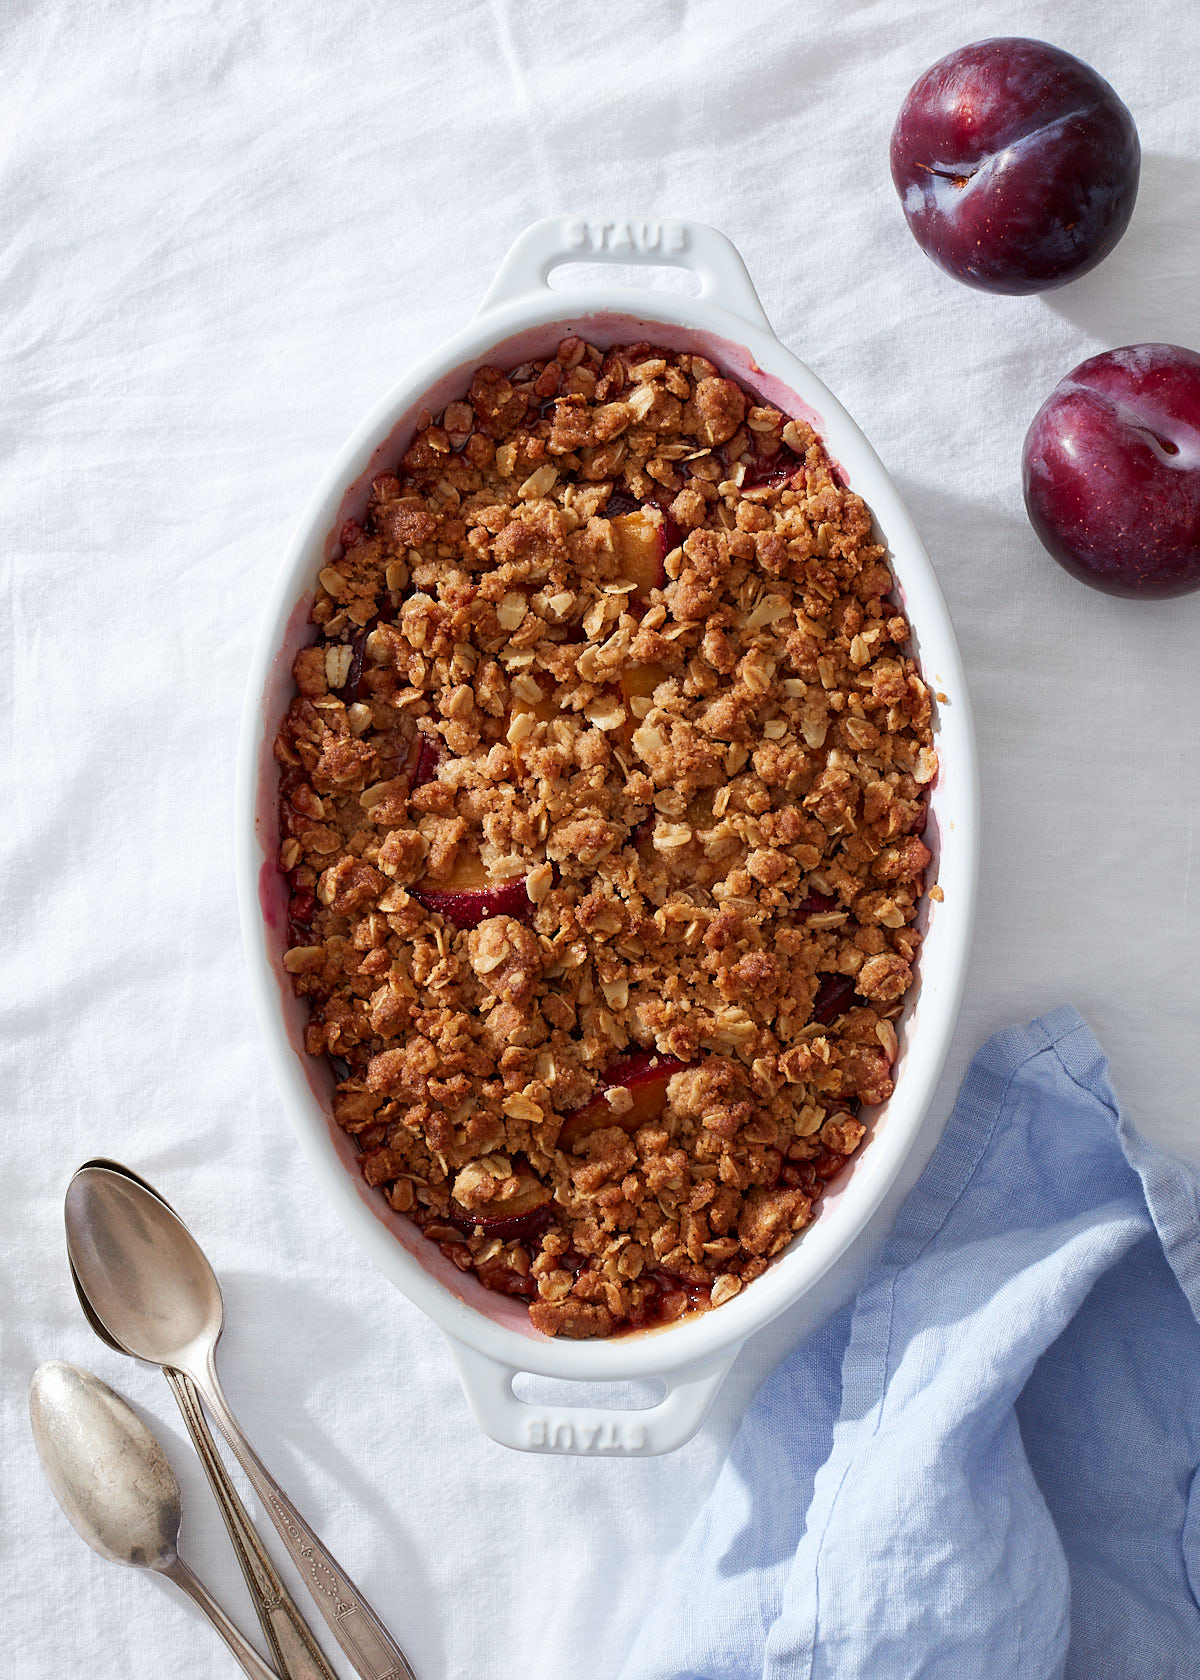 A plum crumble in a white baking dish.